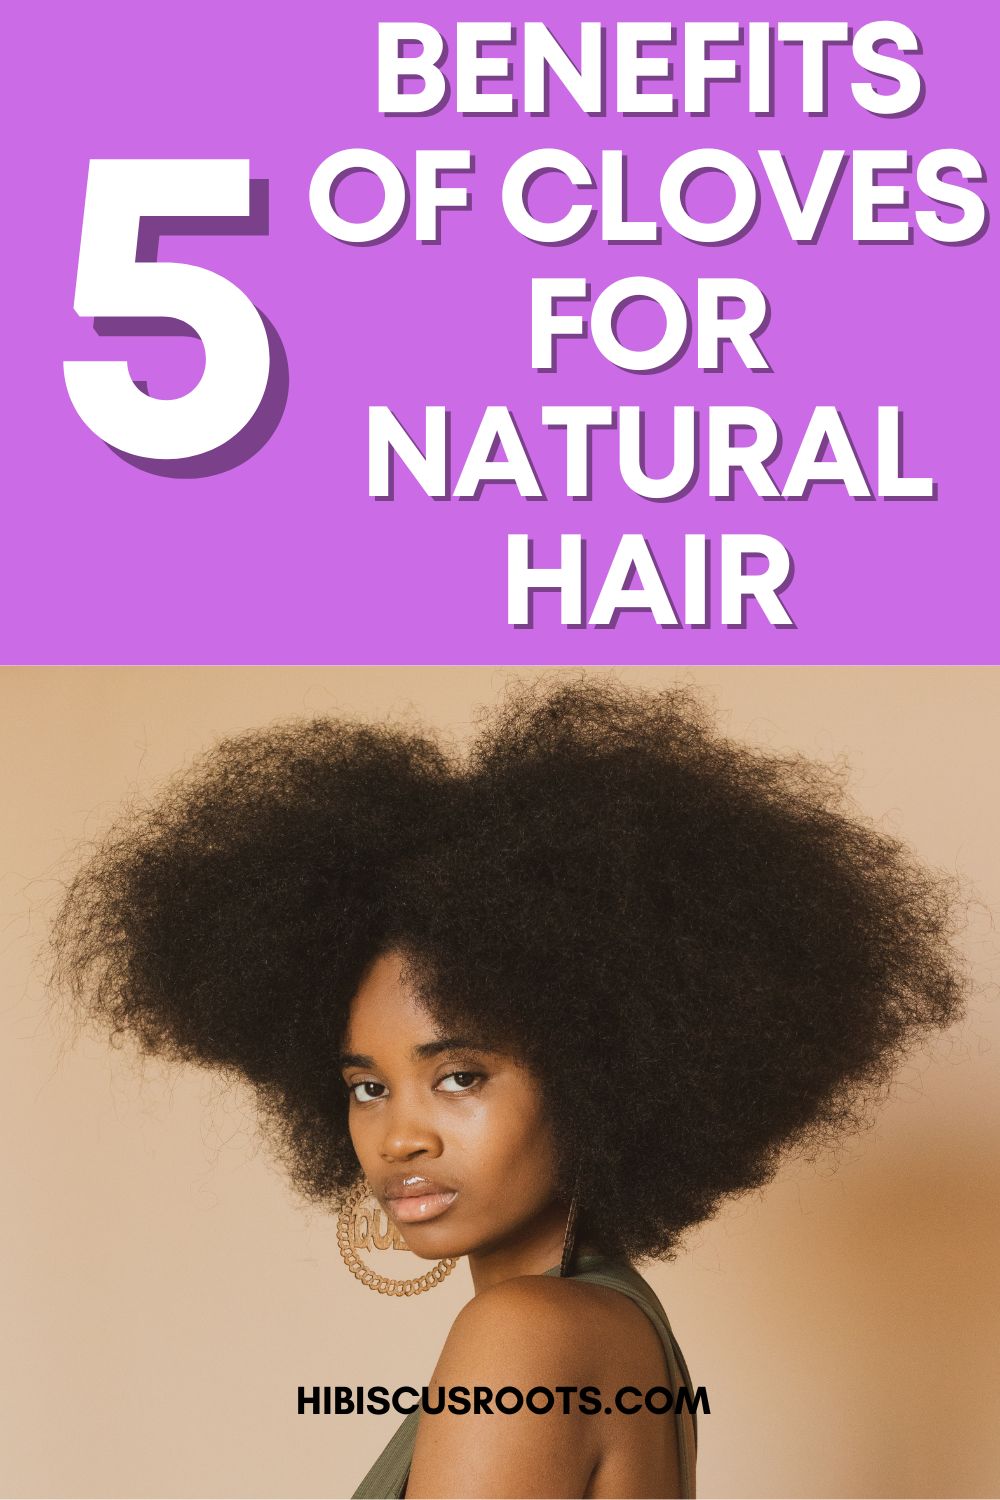 Cloves for Natural Hair Growth: DEBUNKED!